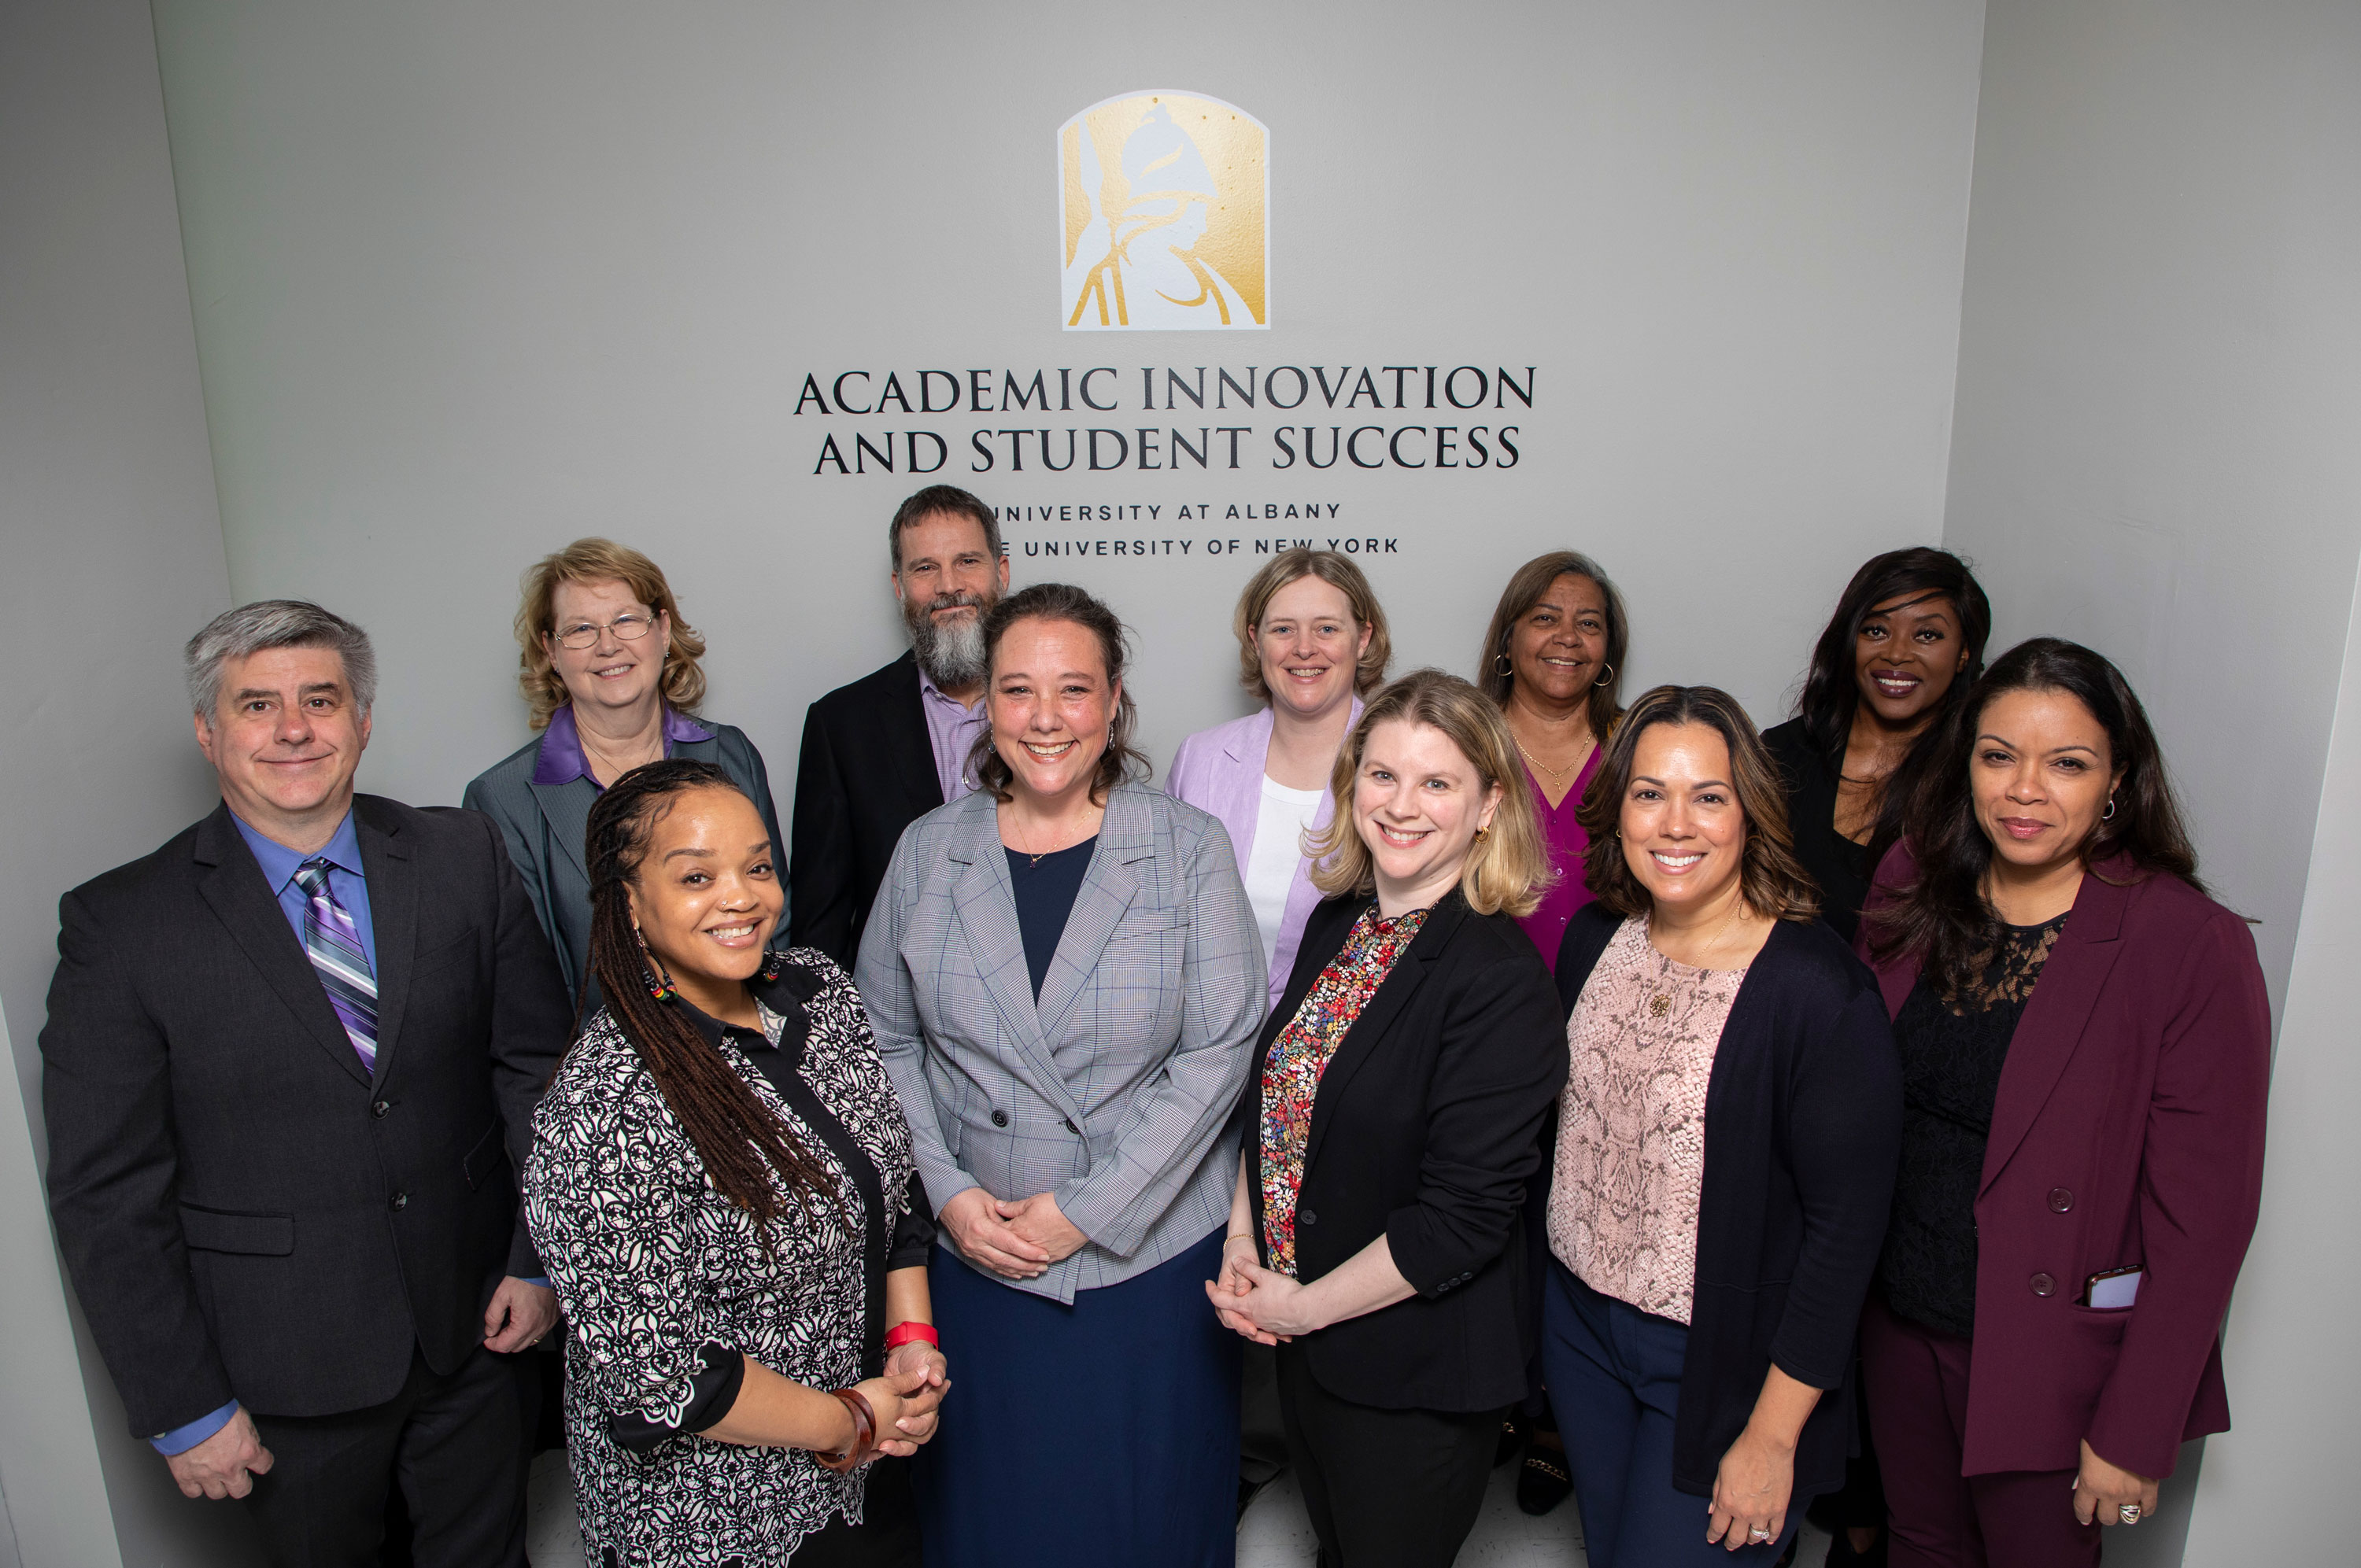 Eleven of the AISS leaders pose for a photo in front of a wall with a sign with the UAlbany logo and the words, "Academic Innovation and Student Success, University at Albany, State University of New York."